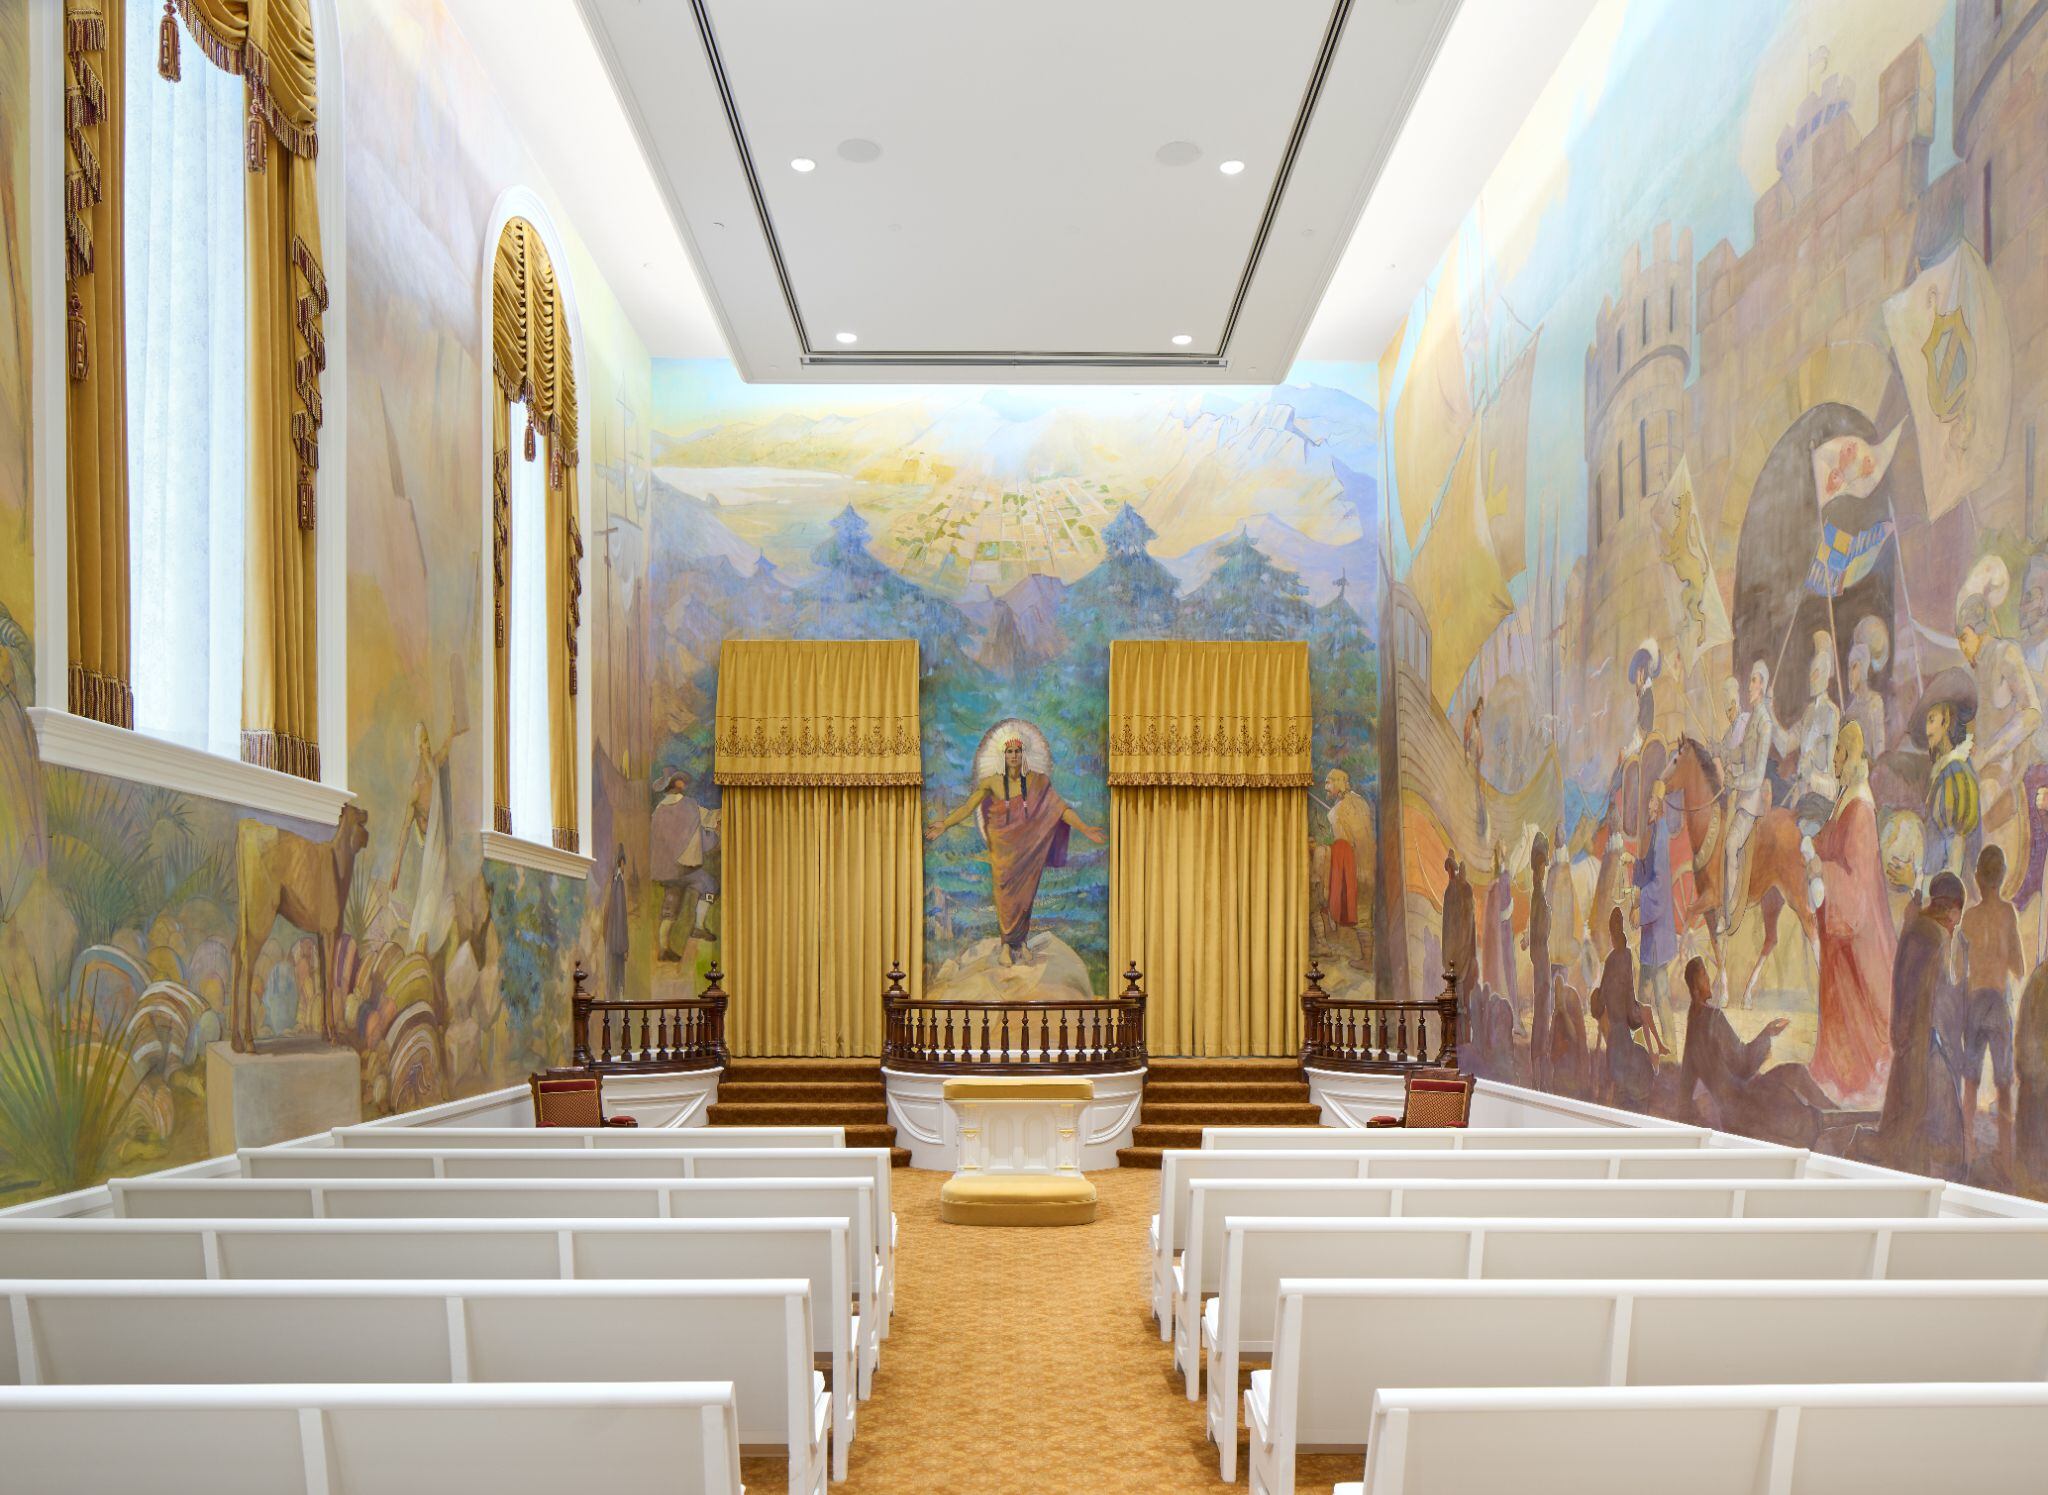 (The Church of Jesus Christ of Latter-day Saints) Ordinance room in the Manti Temple displays the brightened Minerva Teichert murals.